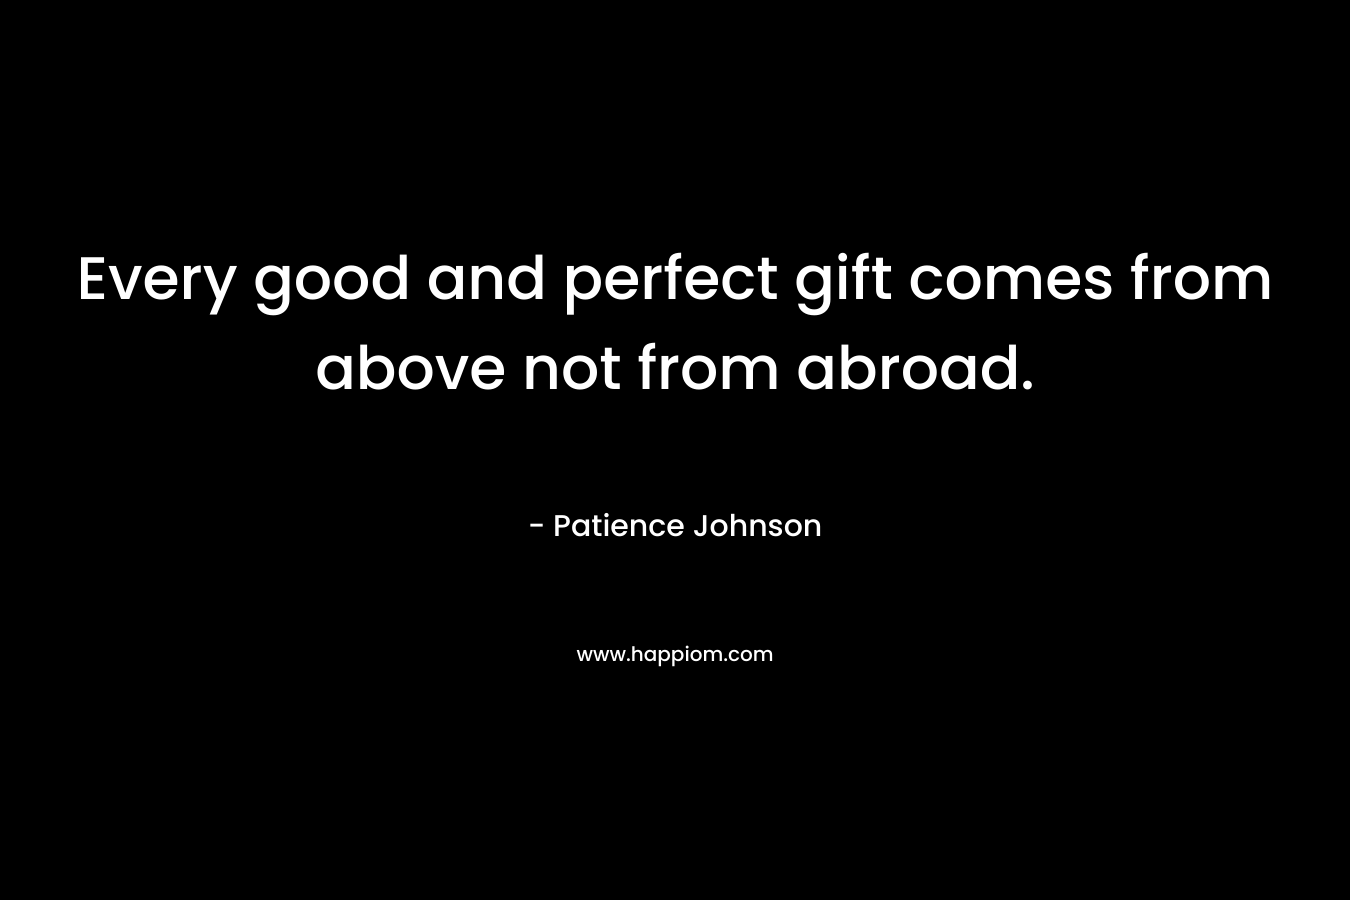 Every good and perfect gift comes from above not from abroad.